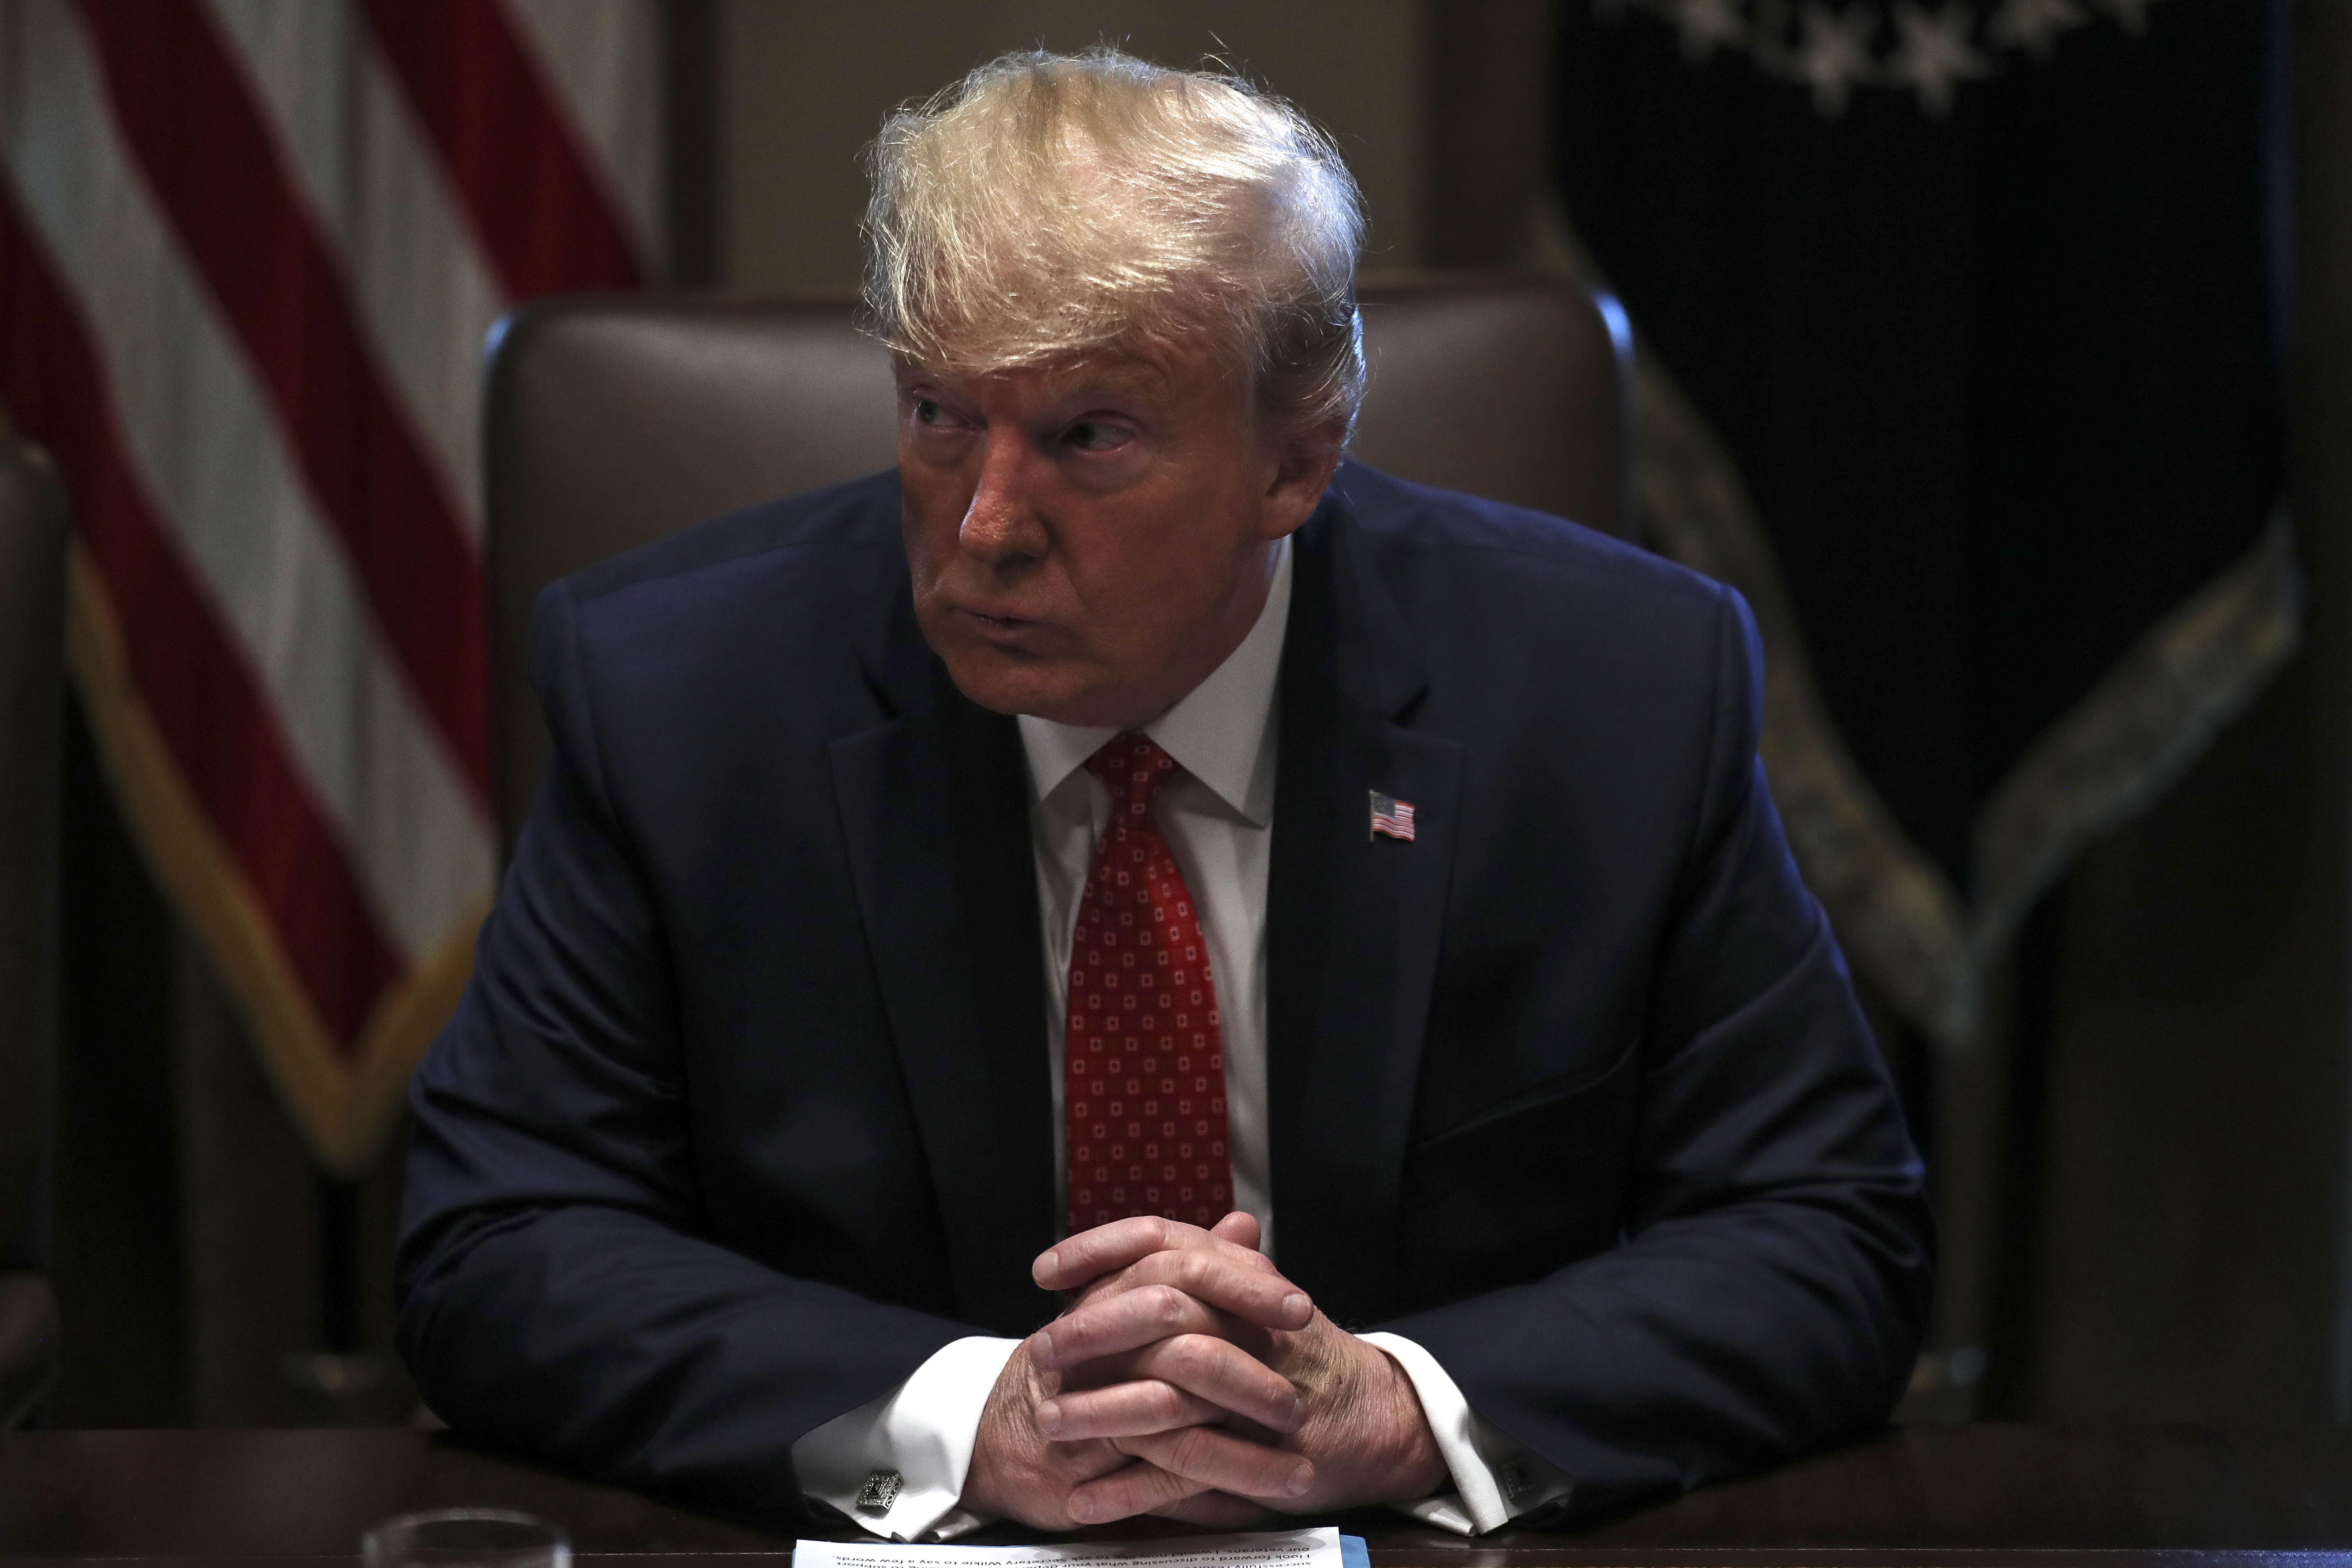 epa08009012 US President Donald J. Trump prays during a Cabinet Meeting in the Cabinet Room of the White House in Washington, DC, USA, 19 November 2019.  EPA/Oliver Contreras / POOL